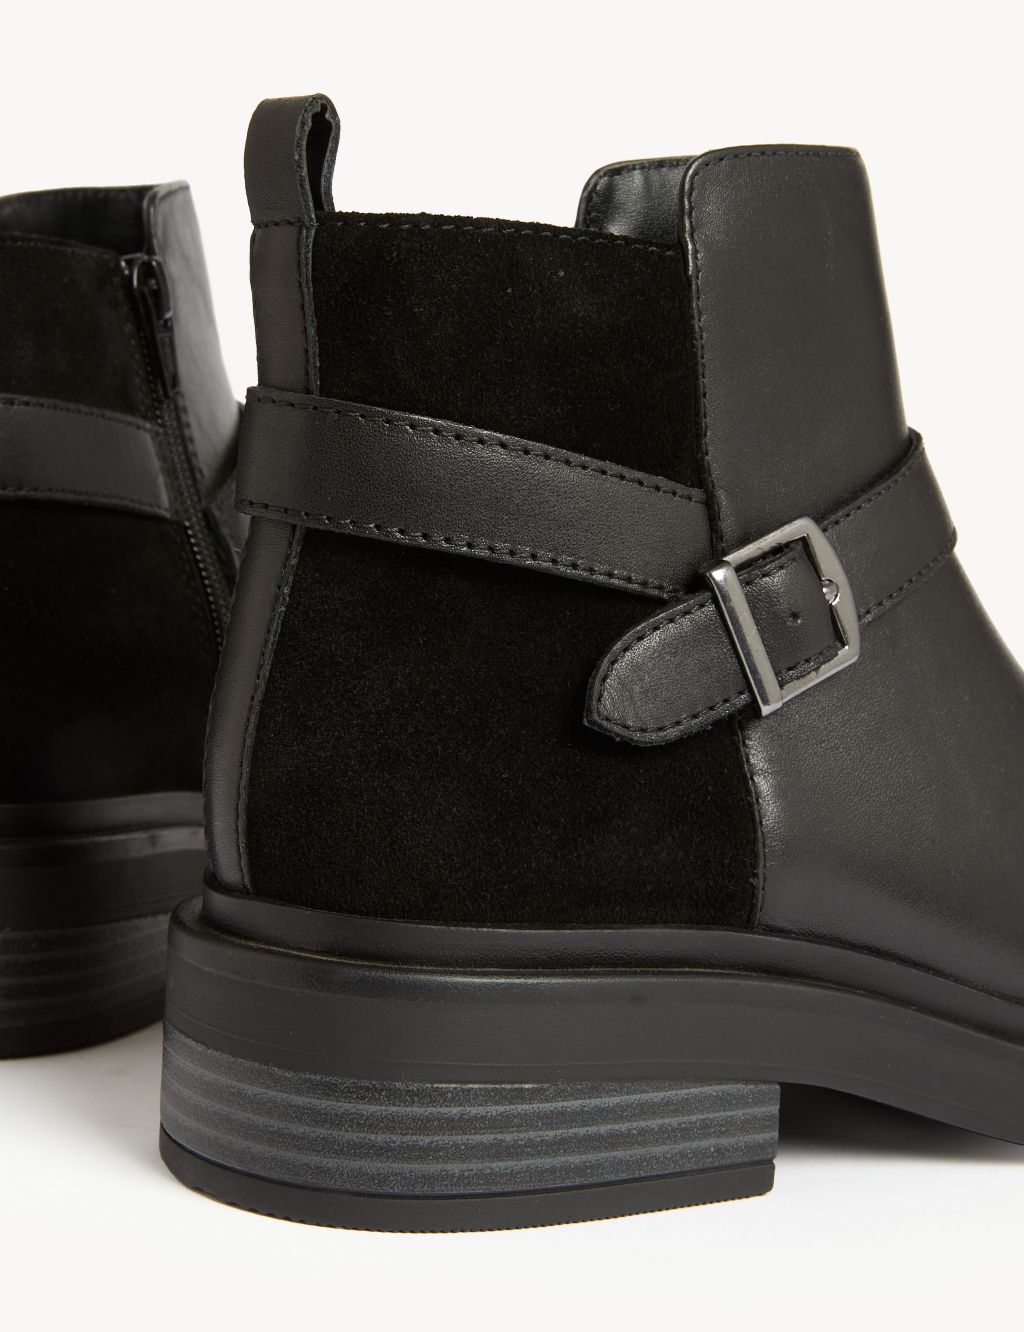 Wide Fit Leather Buckle Ankle Boots image 3